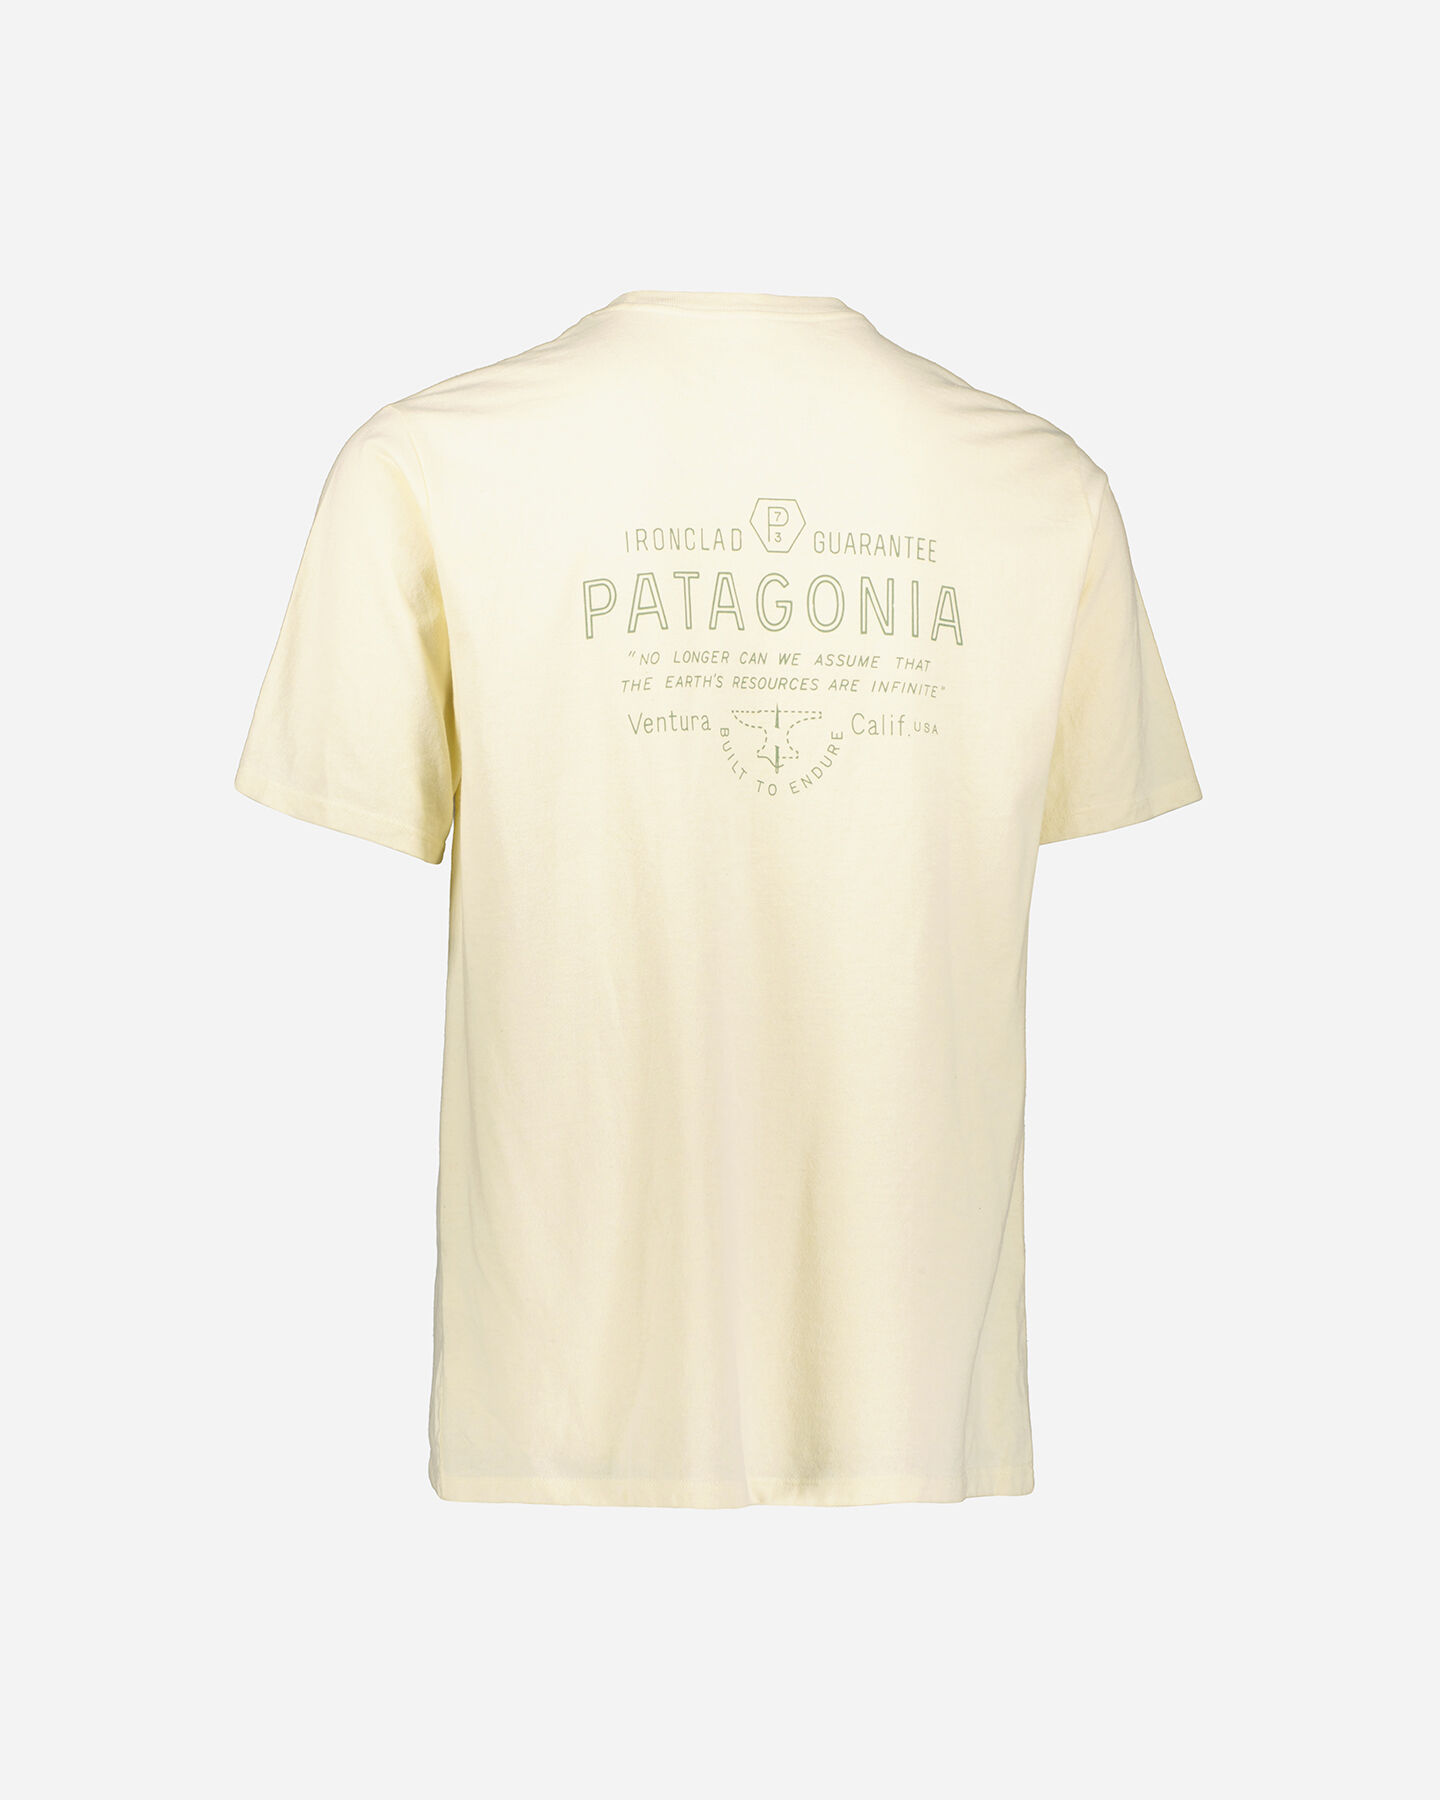  T-Shirt PATAGONIA FORGE MARK RESPONSIBILITY M S4103407|BCW|S scatto 1